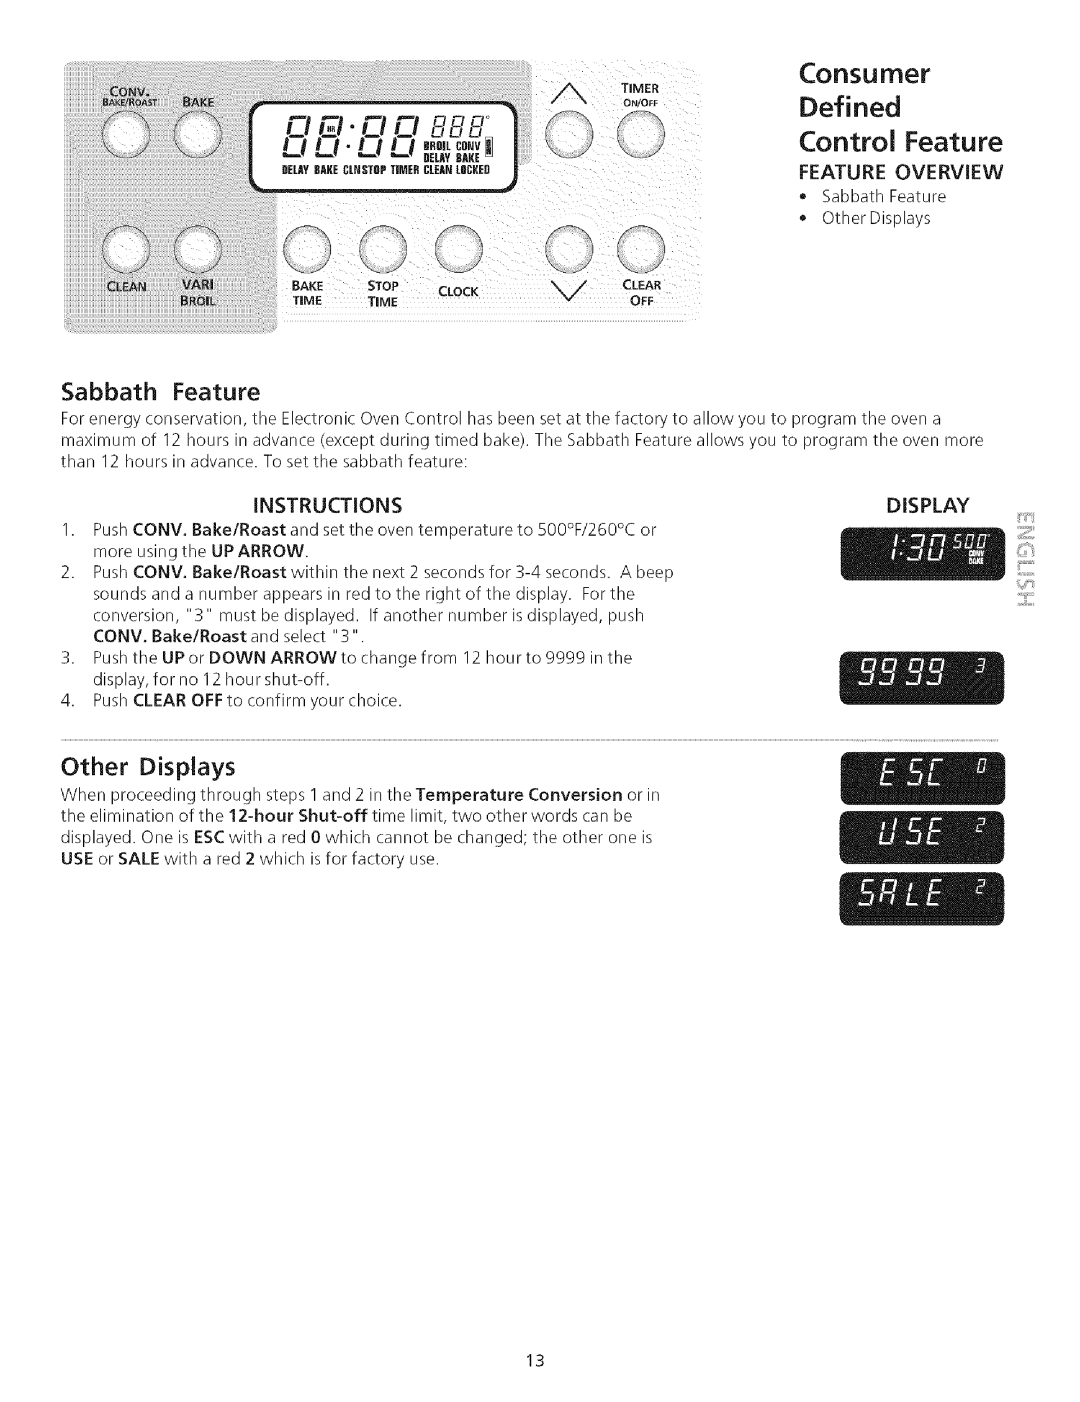 Kenmore 790.75503 manual Defined Control Feature, Consumer, Other Displays, Sabbath Feature, Feature Overview, Instructions 